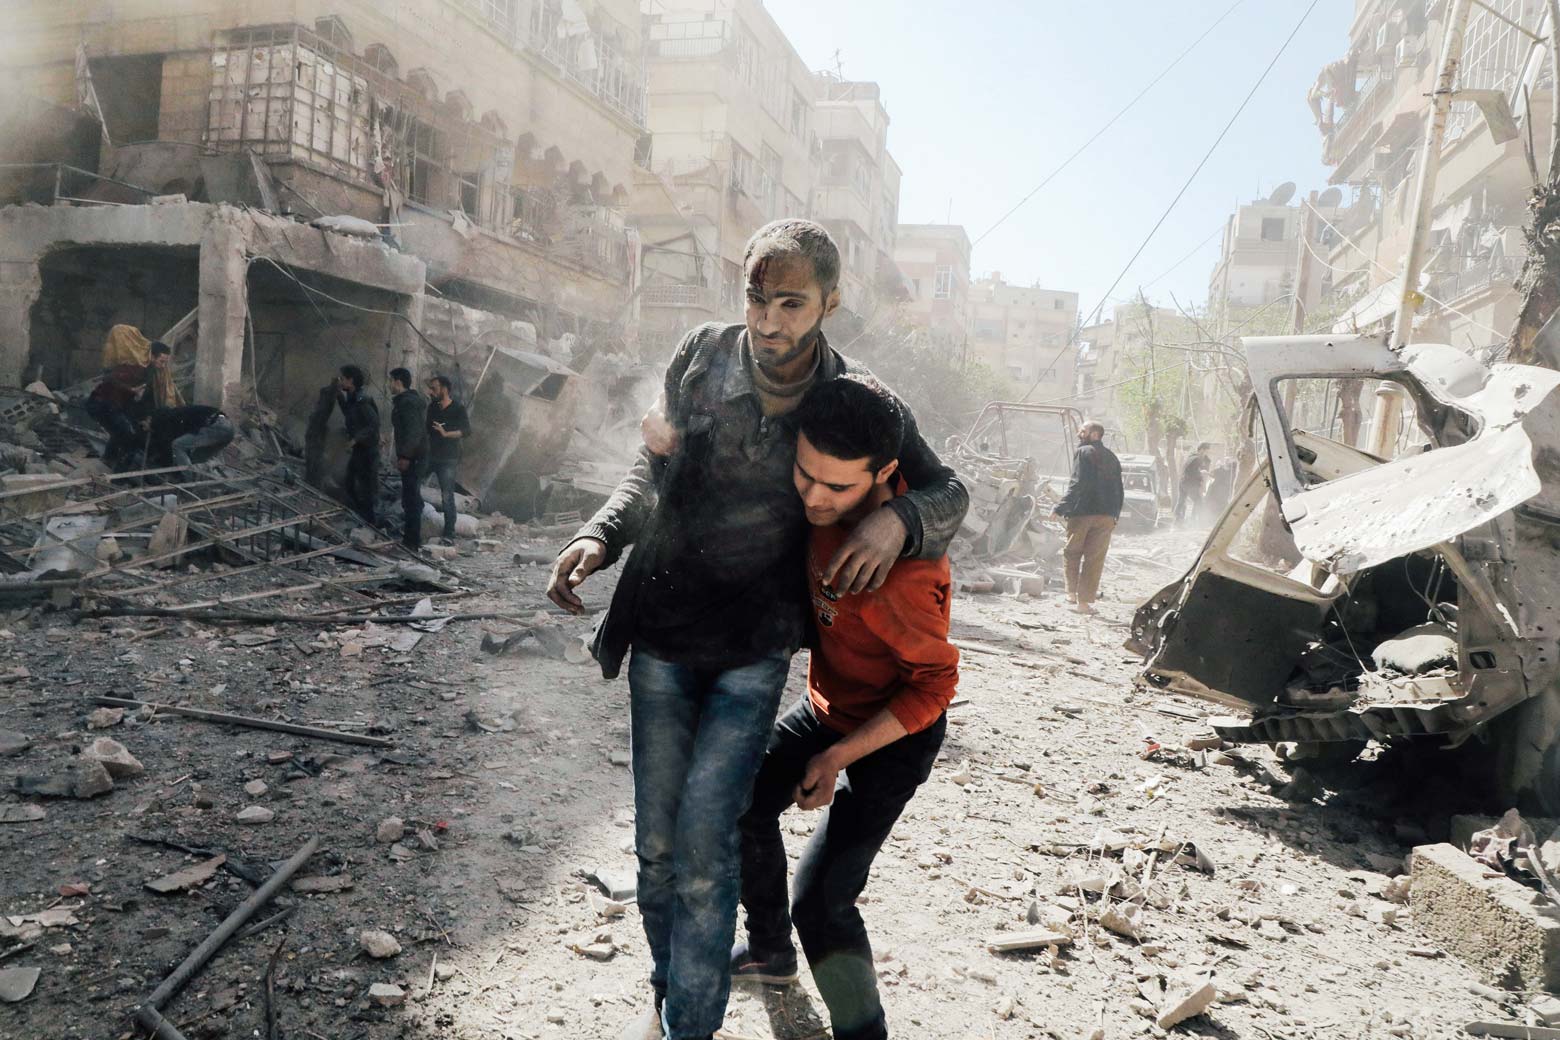 A Syrian man helps evacuate an injured victim following Syrian government air strikes on the Eastern Ghouta rebel-held enclave of Douma, on the outskirts of the capital Damascus on March 20, 2018.